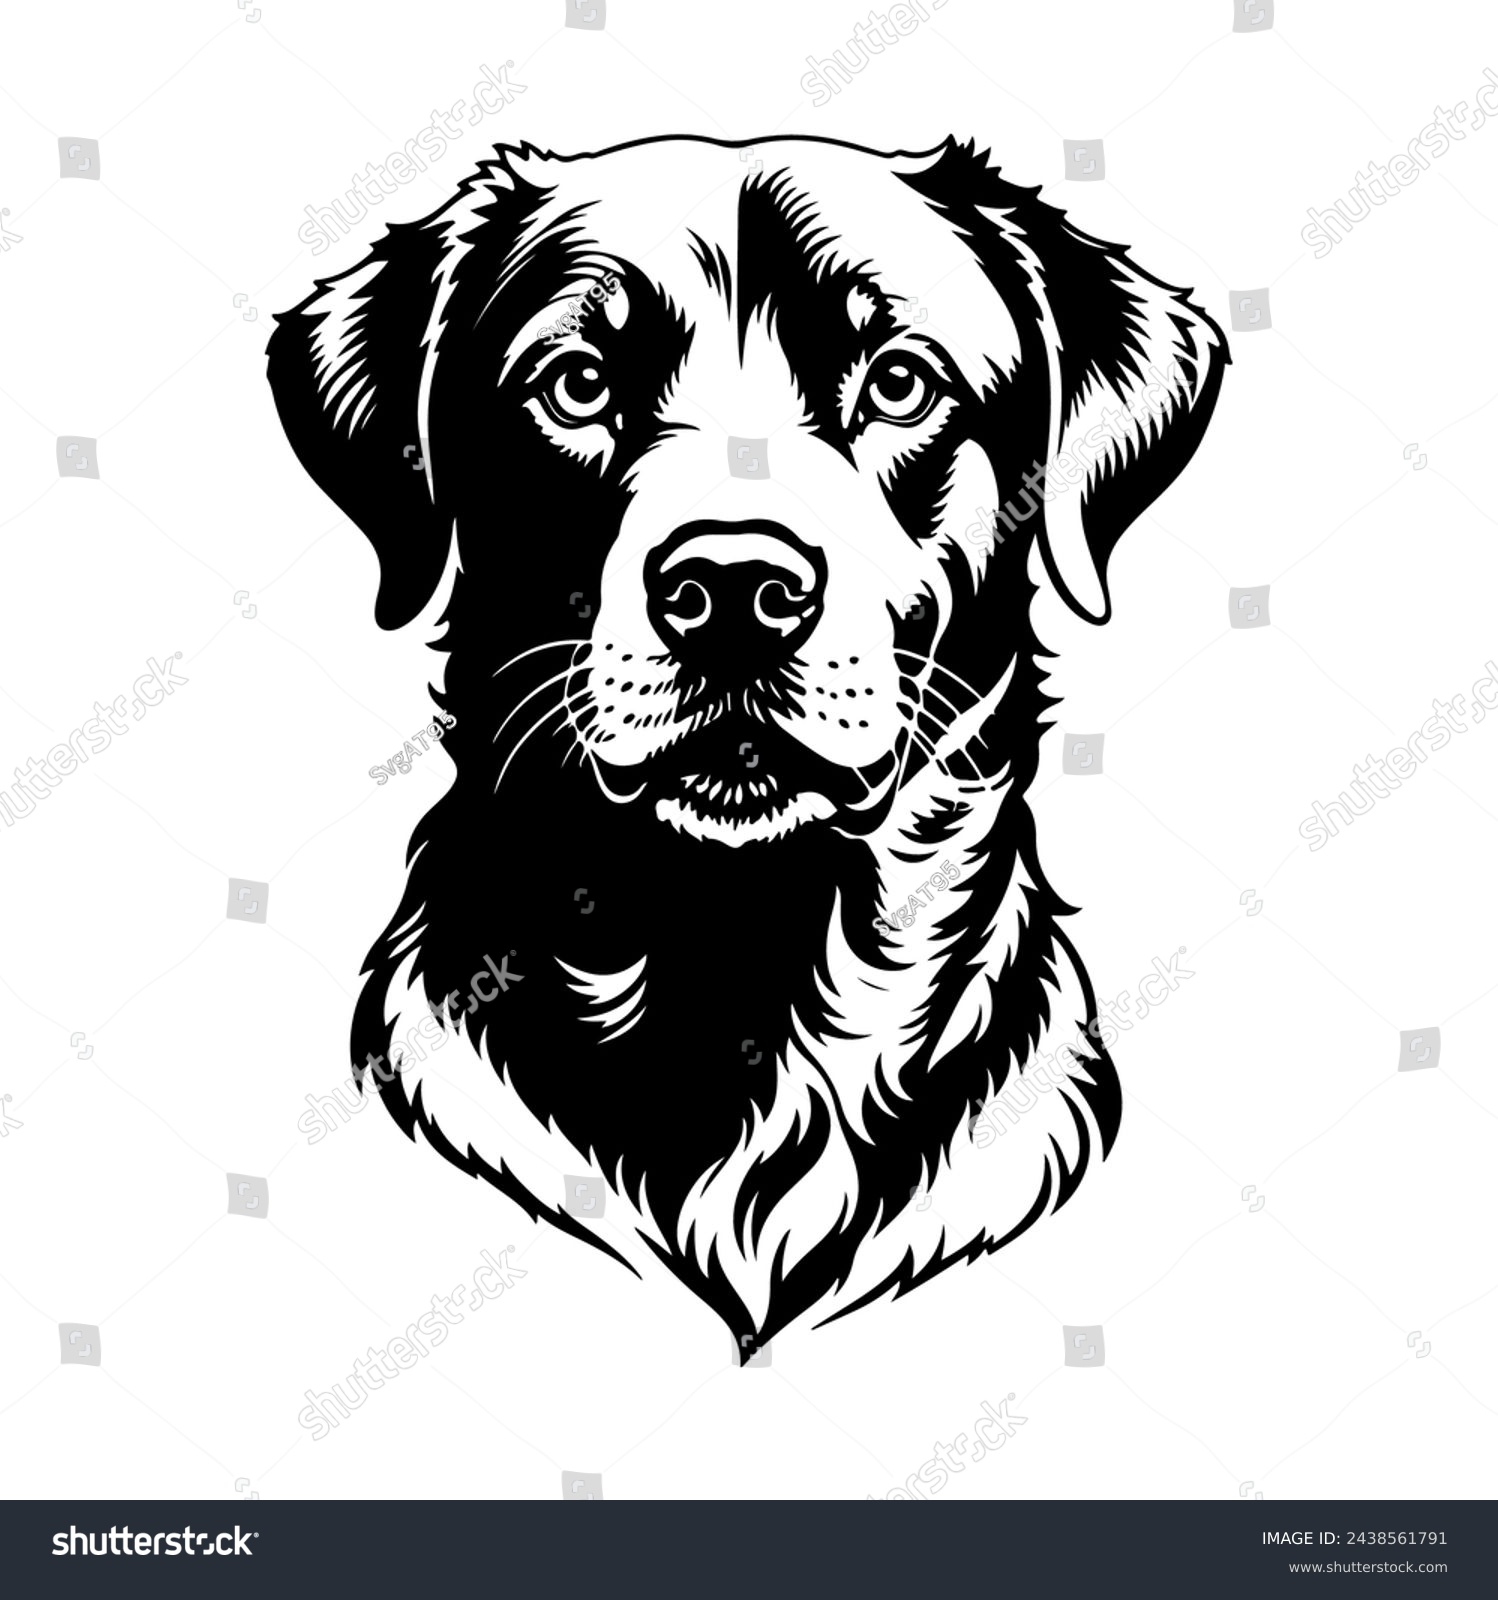 SVG of Portrait of a Chesapeake Bay Retriever Dog Vector isolated on white background, Dog Silhouettes. svg